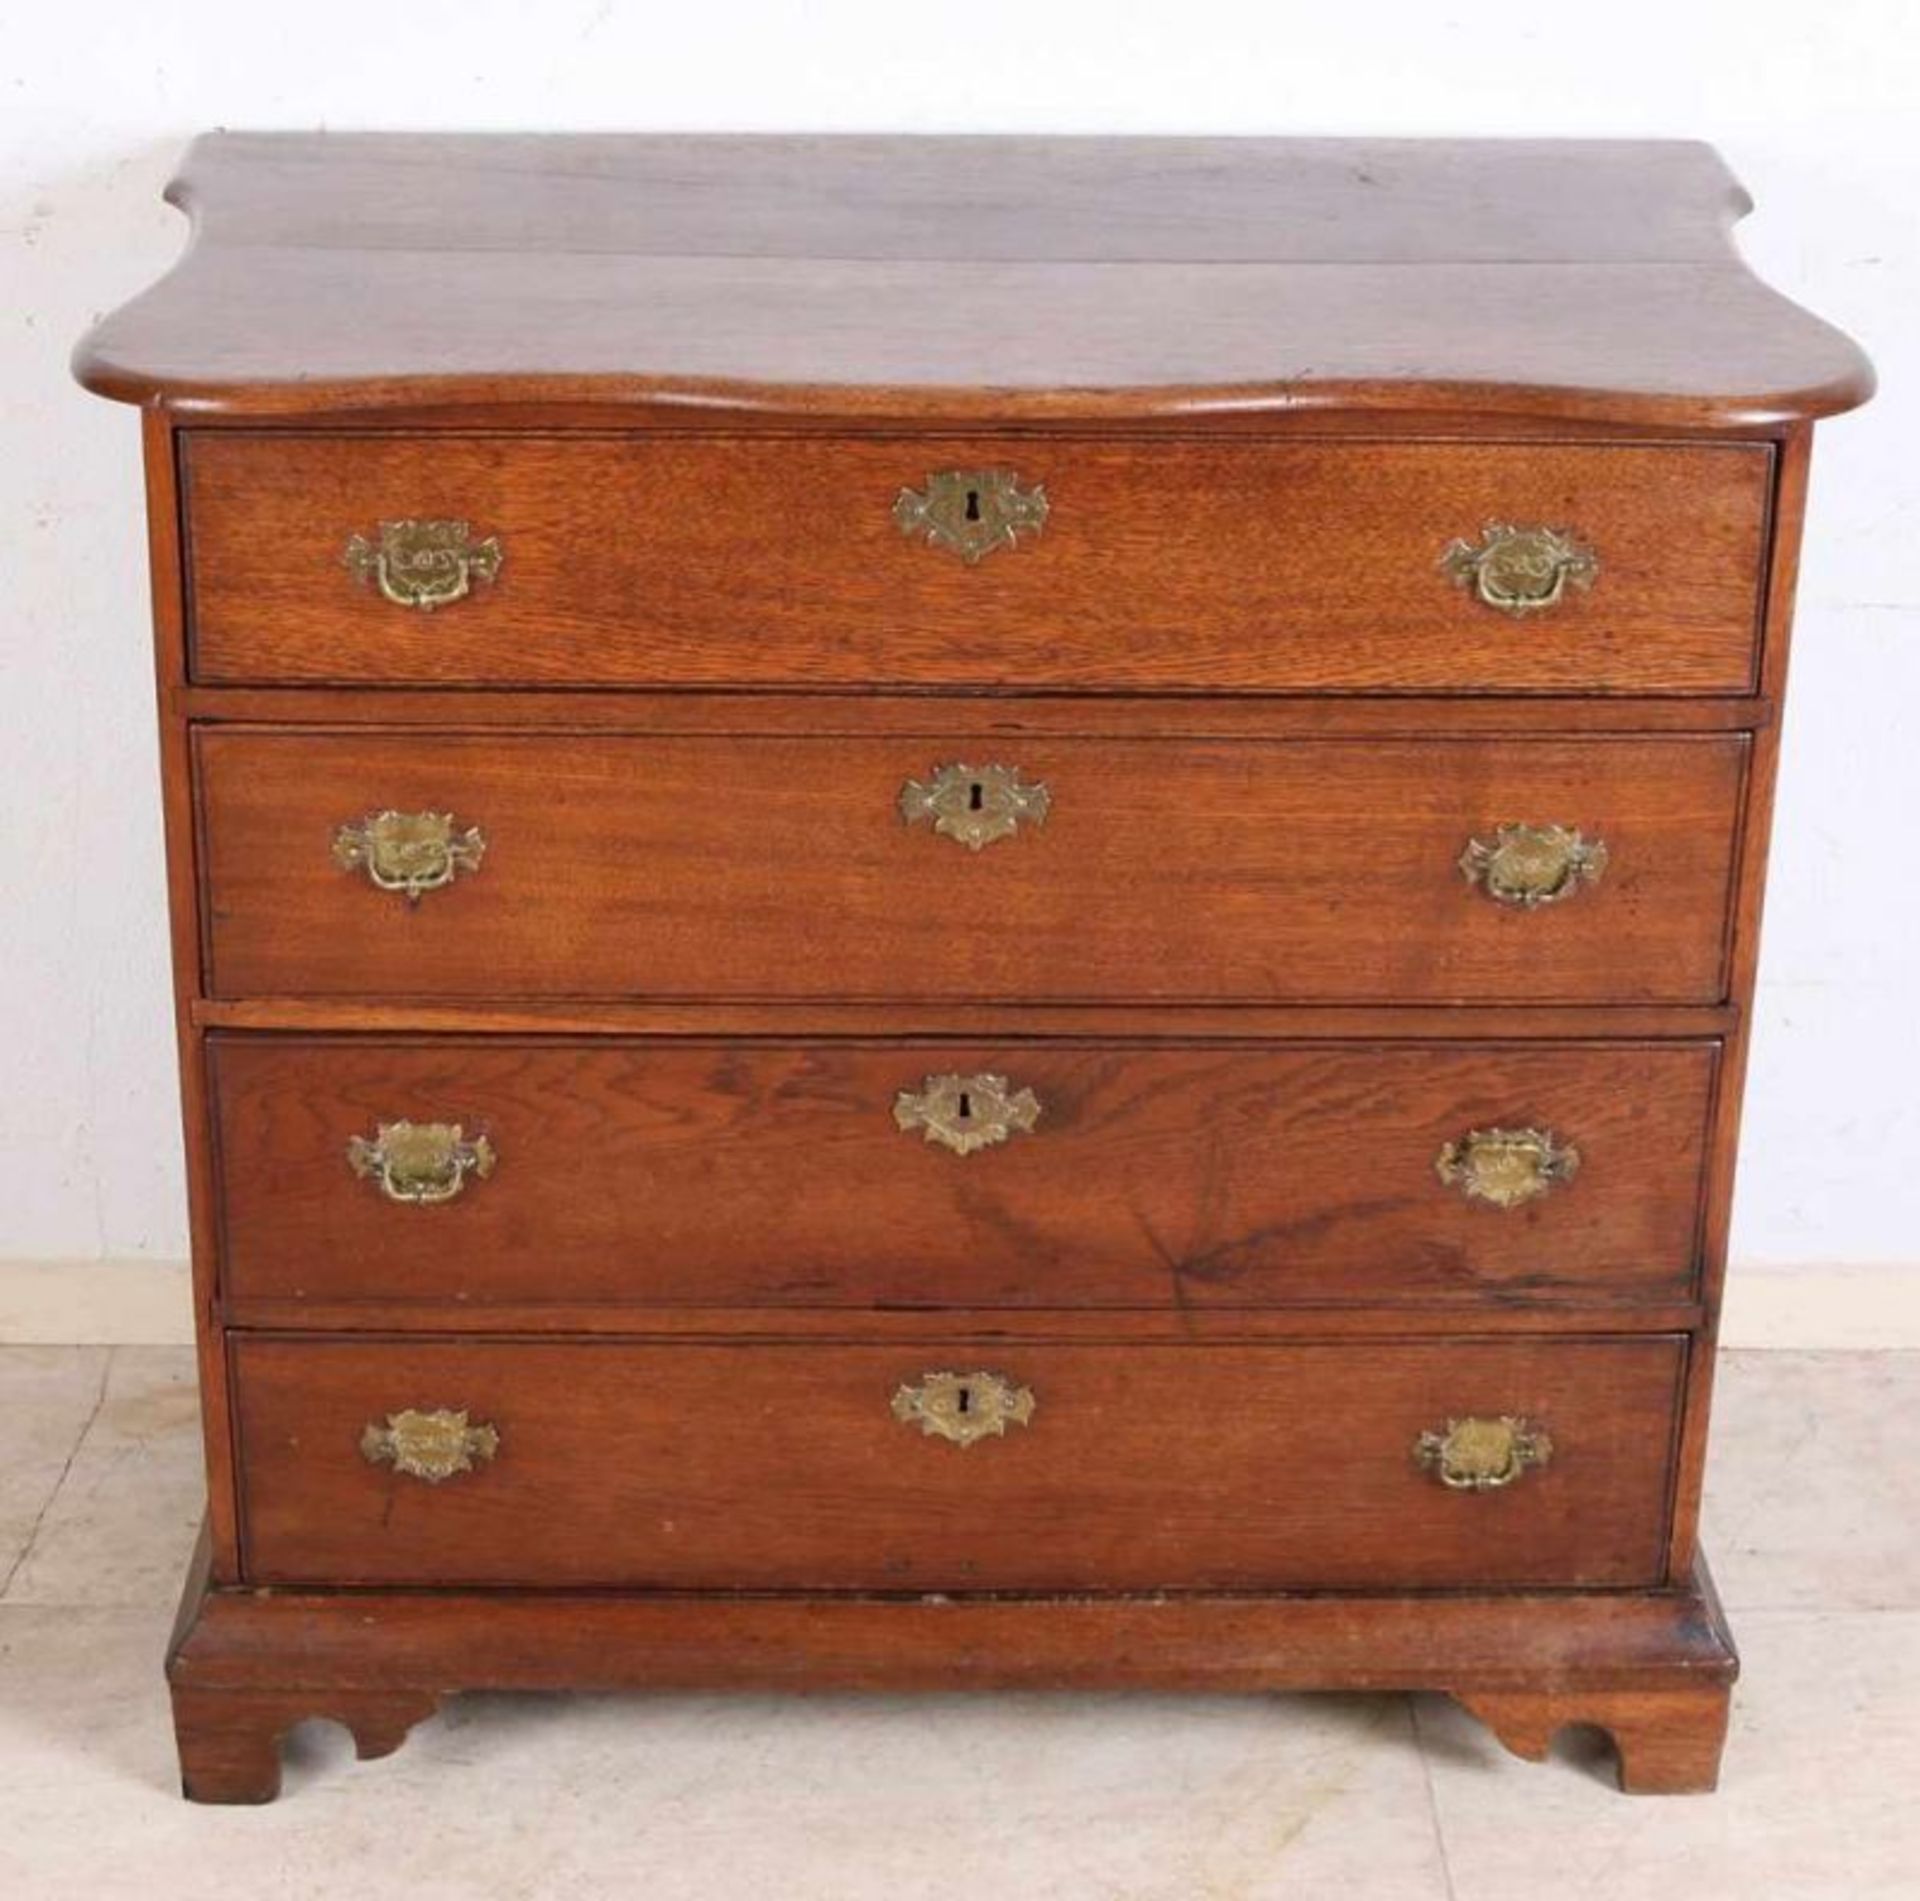 Dutch oak 4-drawer chest of drawers with contoured top and original brass fittings. Around 1800.